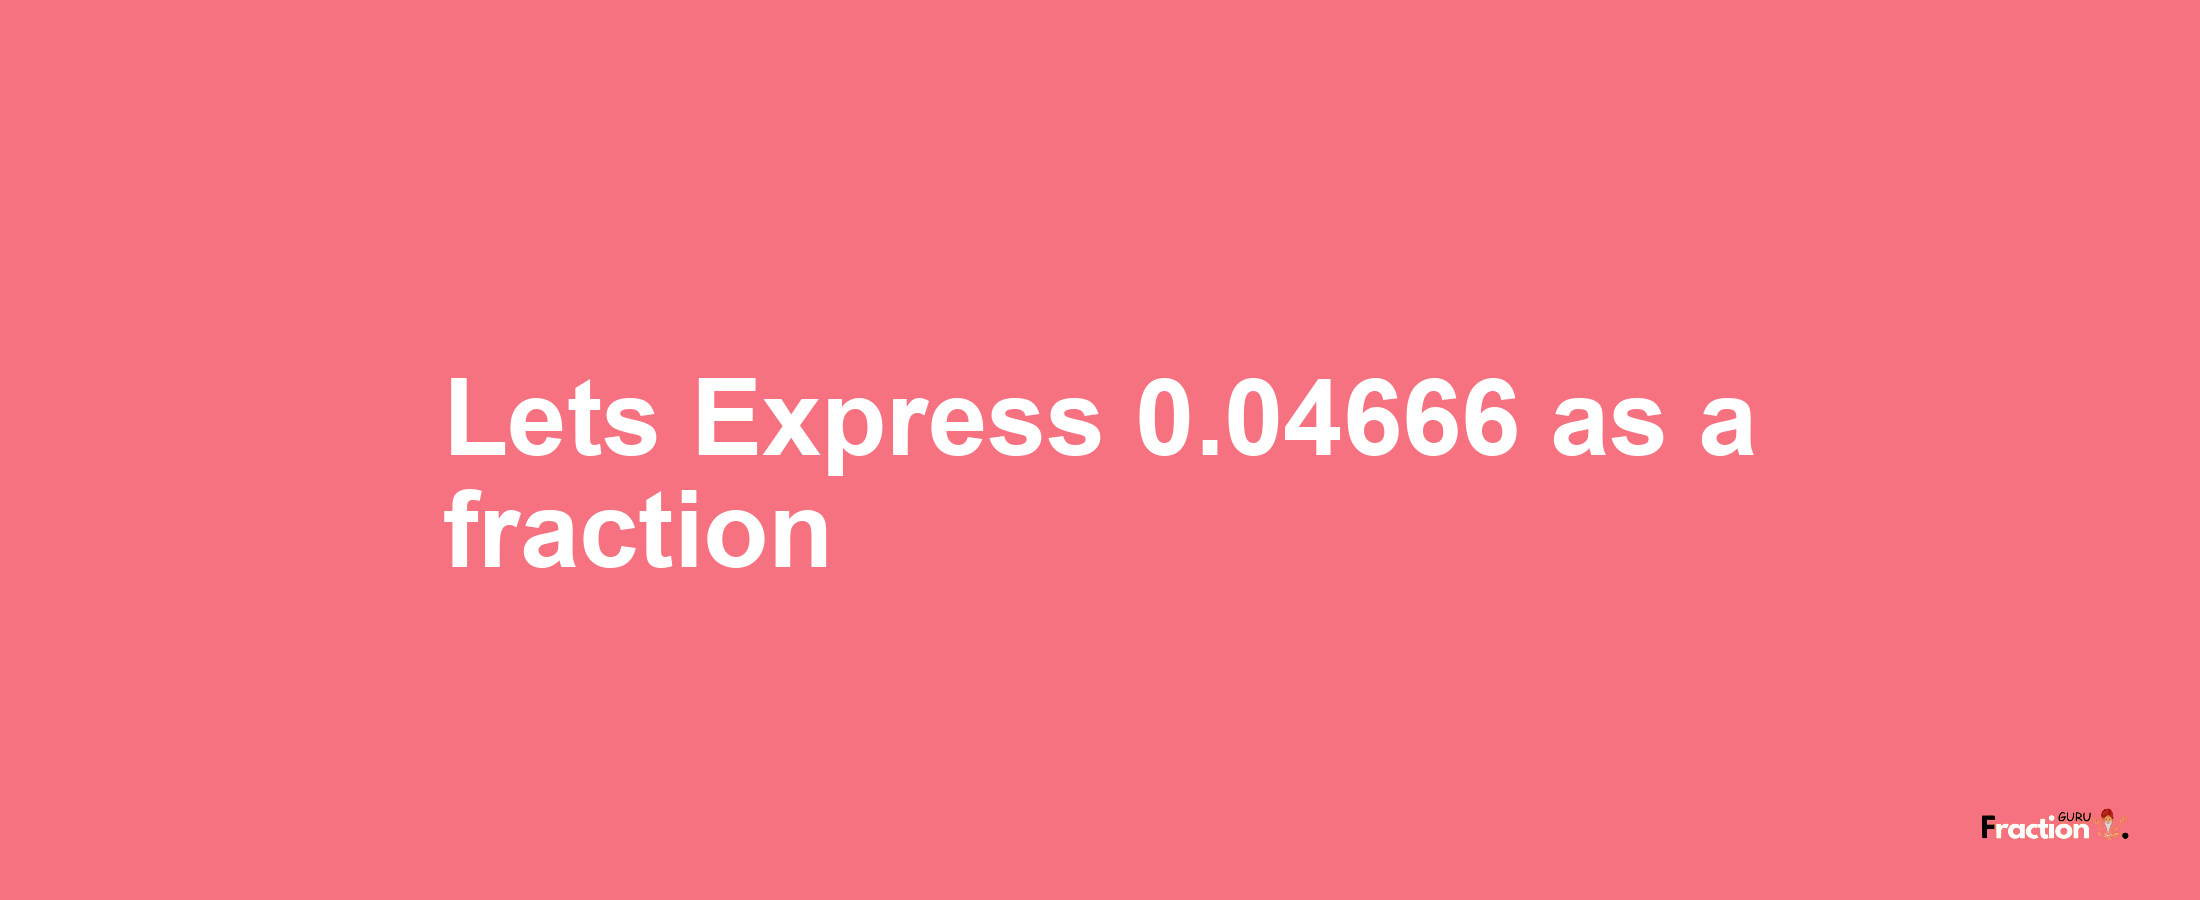 Lets Express 0.04666 as afraction